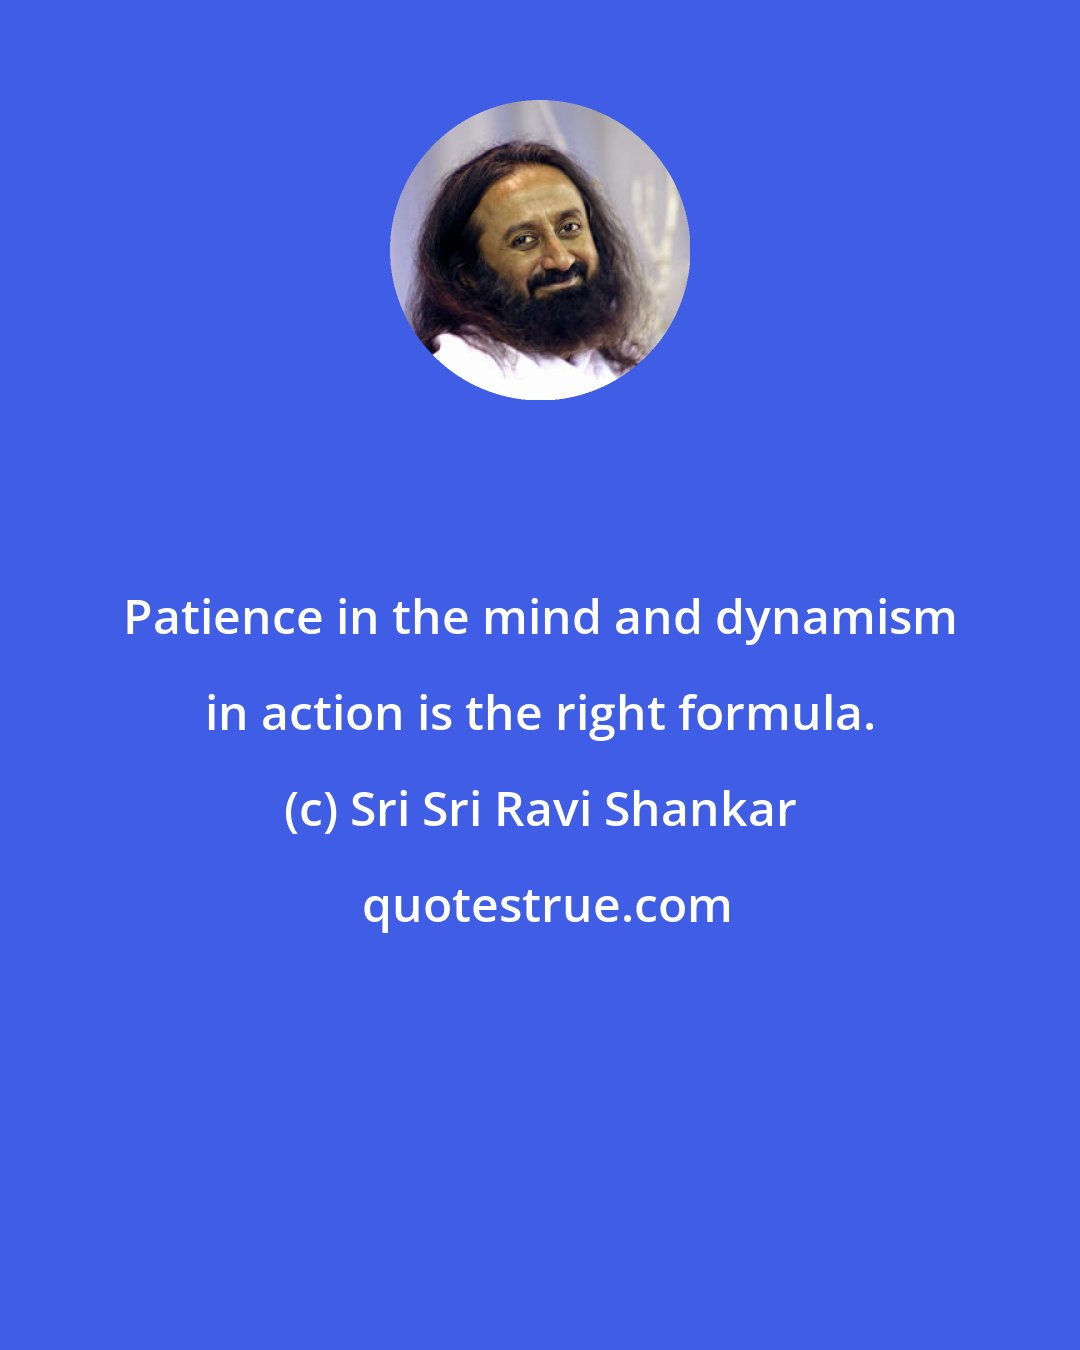 Sri Sri Ravi Shankar: Patience in the mind and dynamism in action is the right formula.